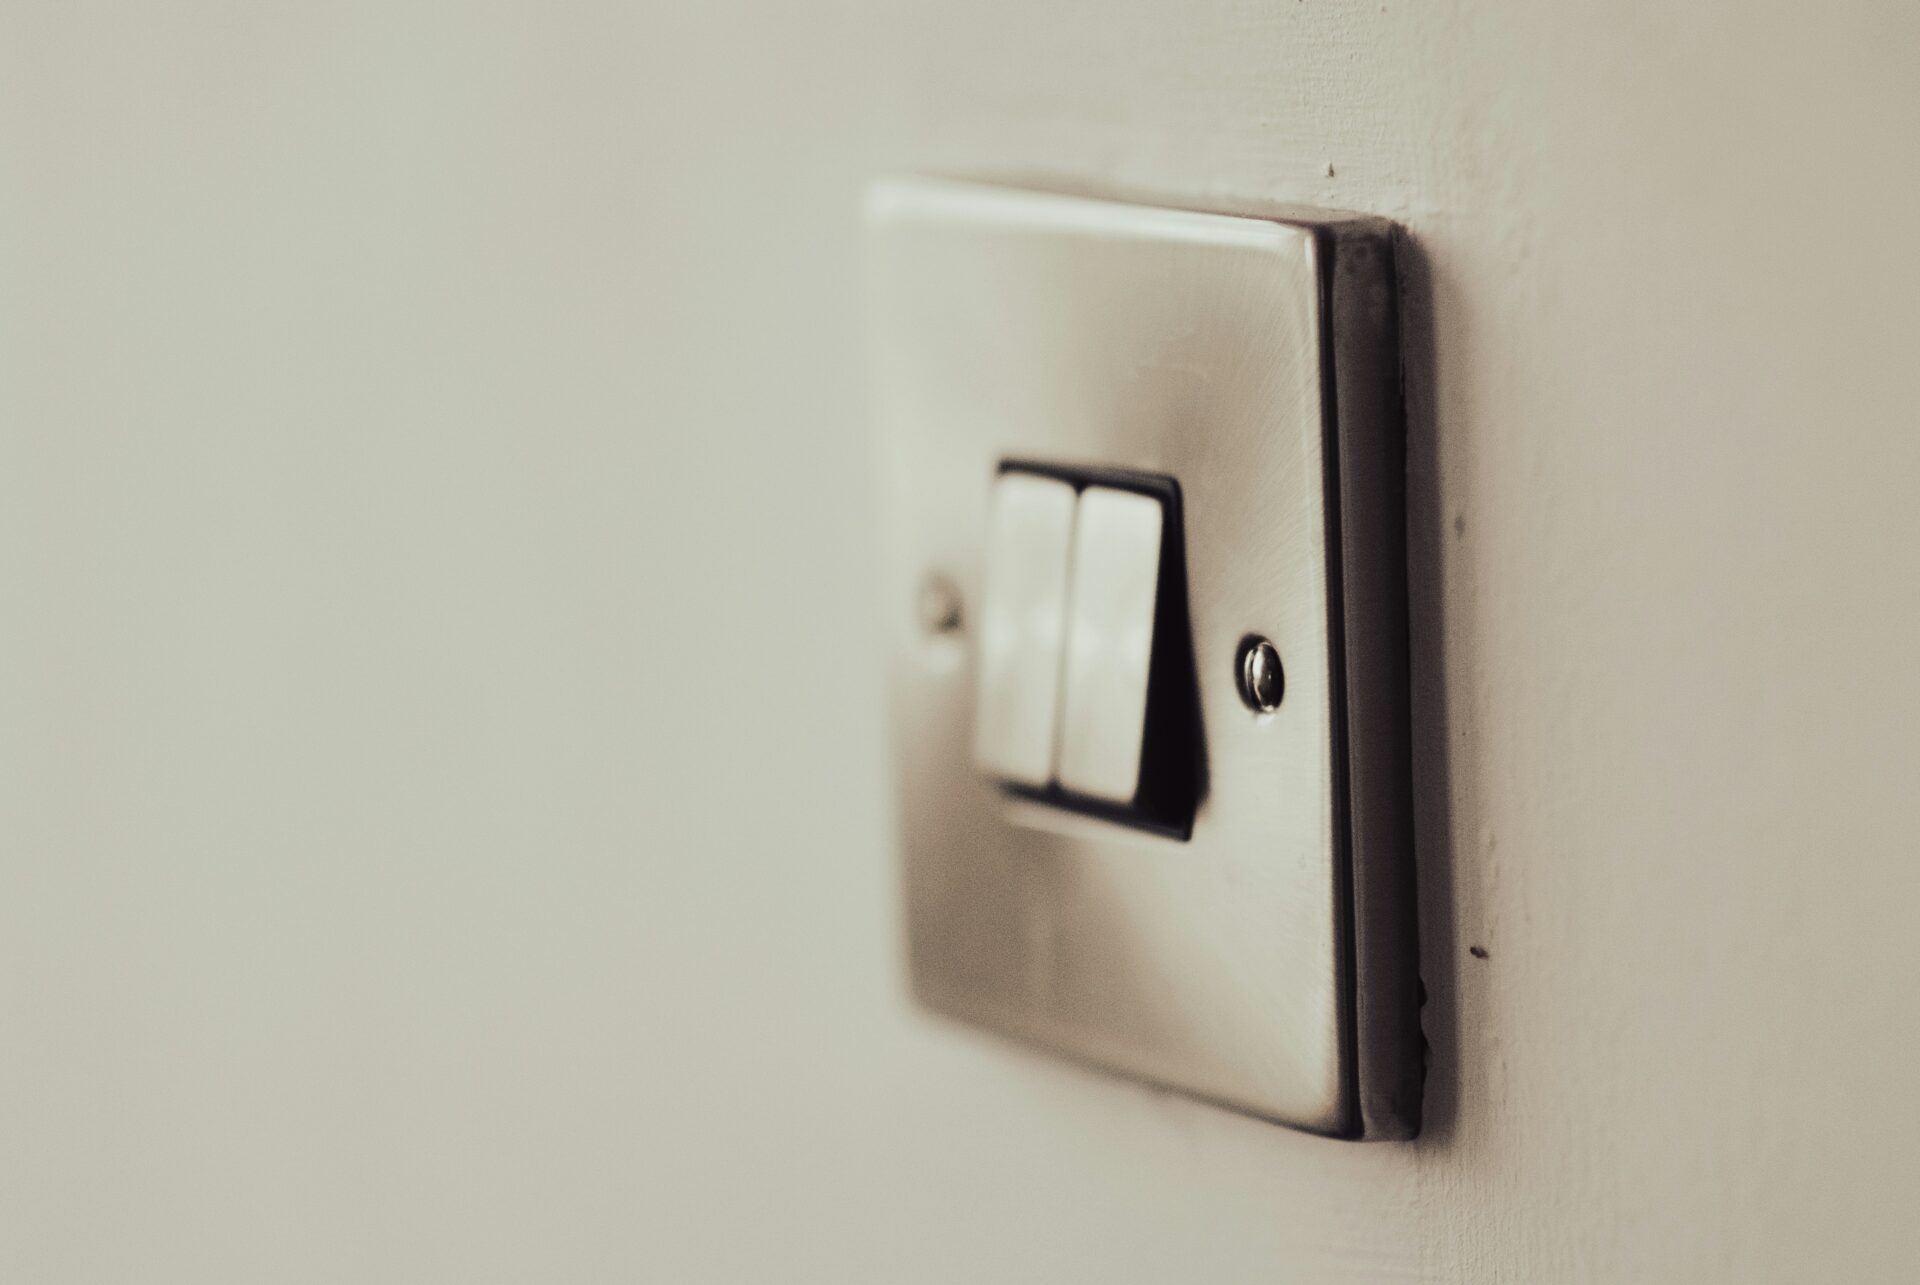 Light switch, set in the 'off' position